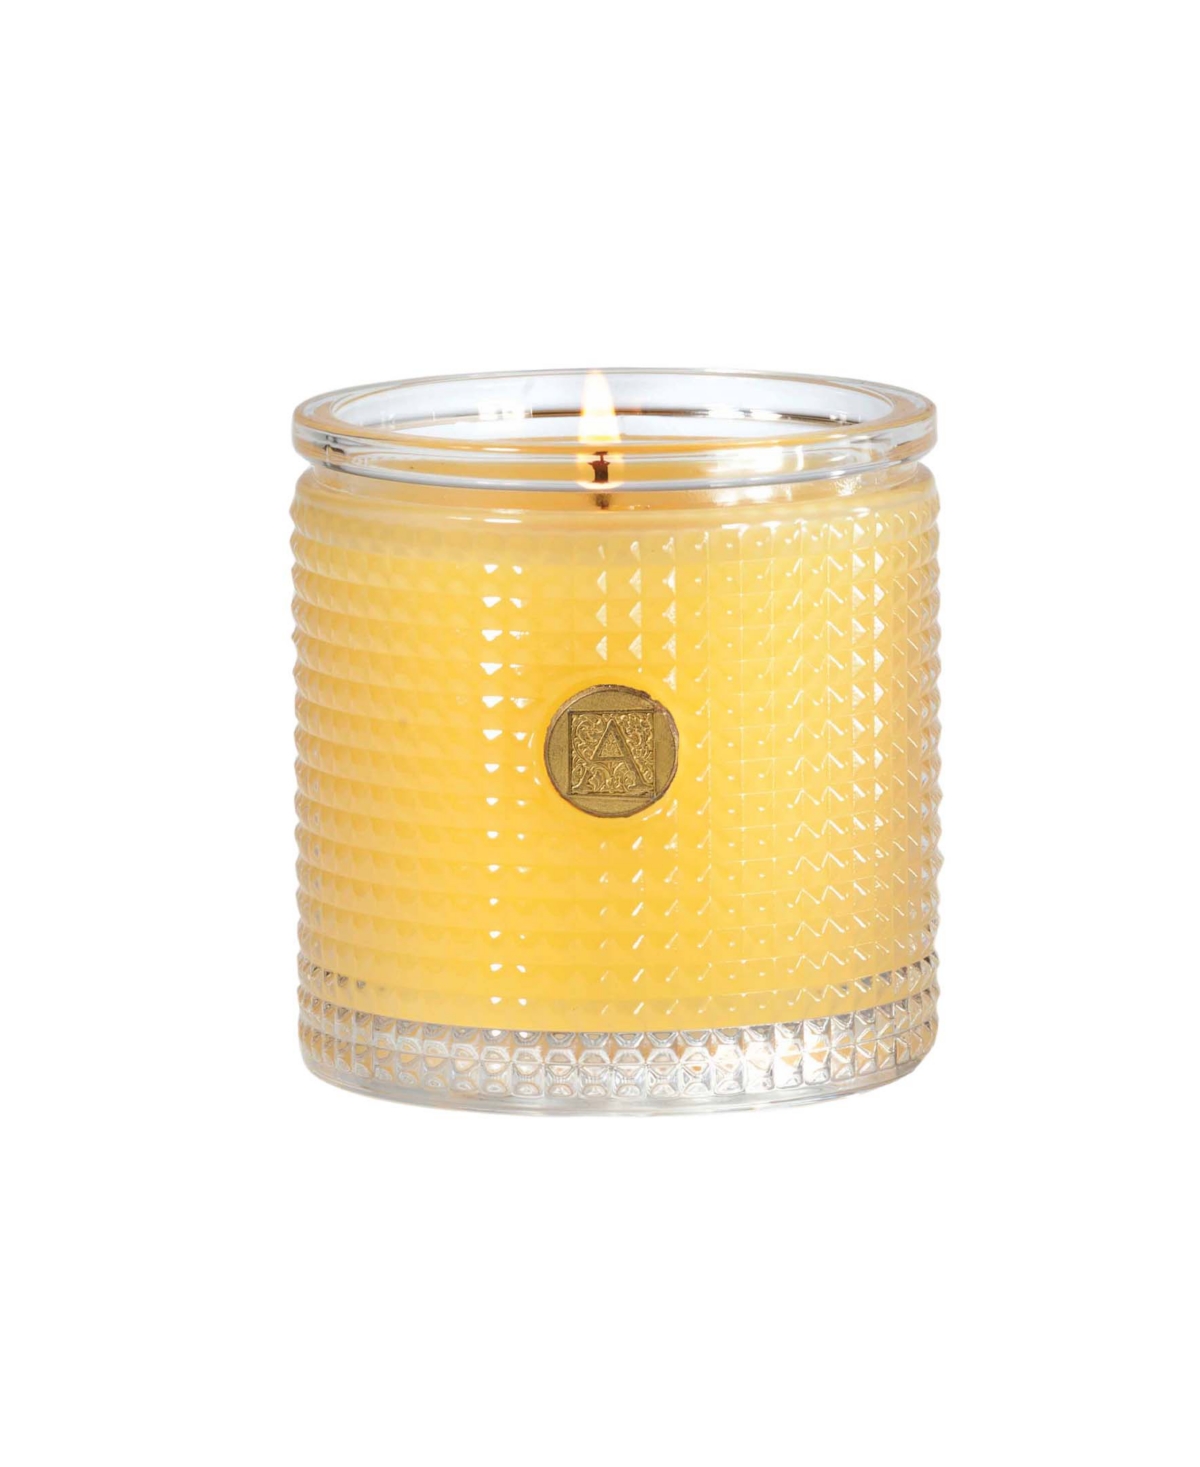 Agave Pineapple Textured Candle - Yellow